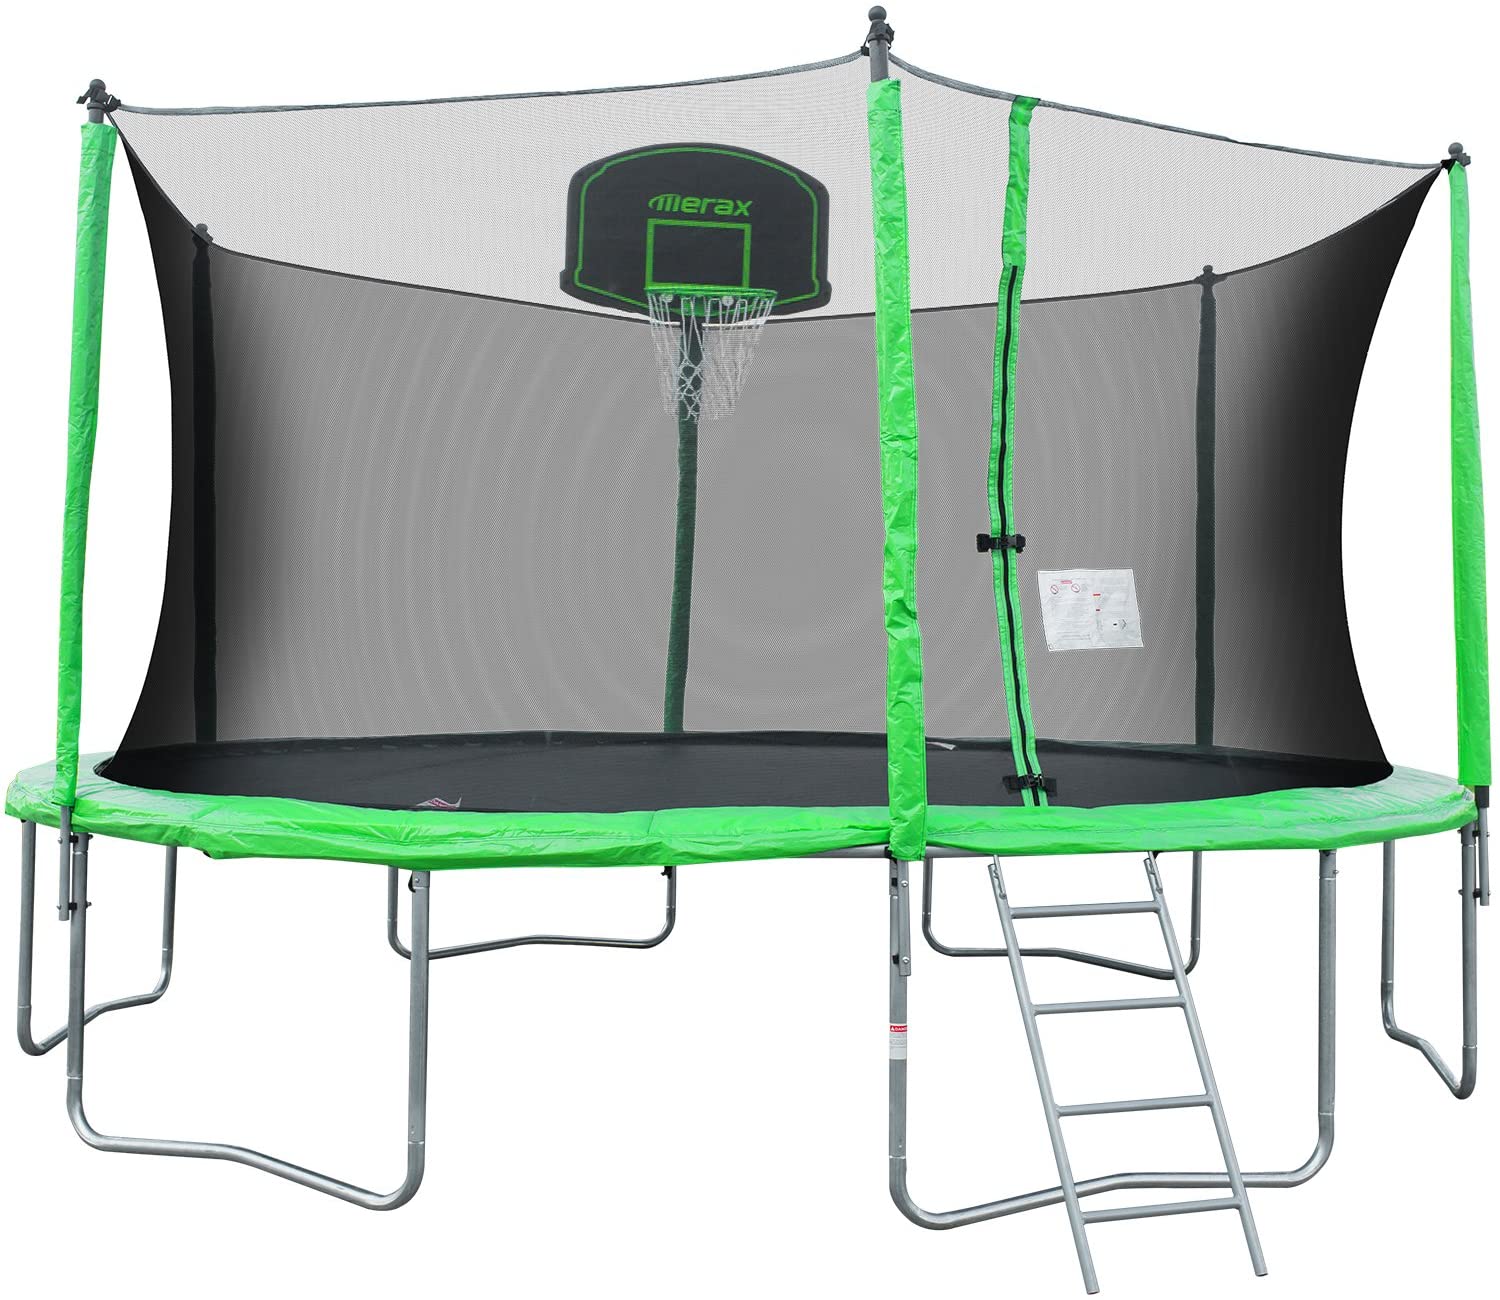 Best 15 ft Trampolines That You Can Buy in UK [2022 Reviews]